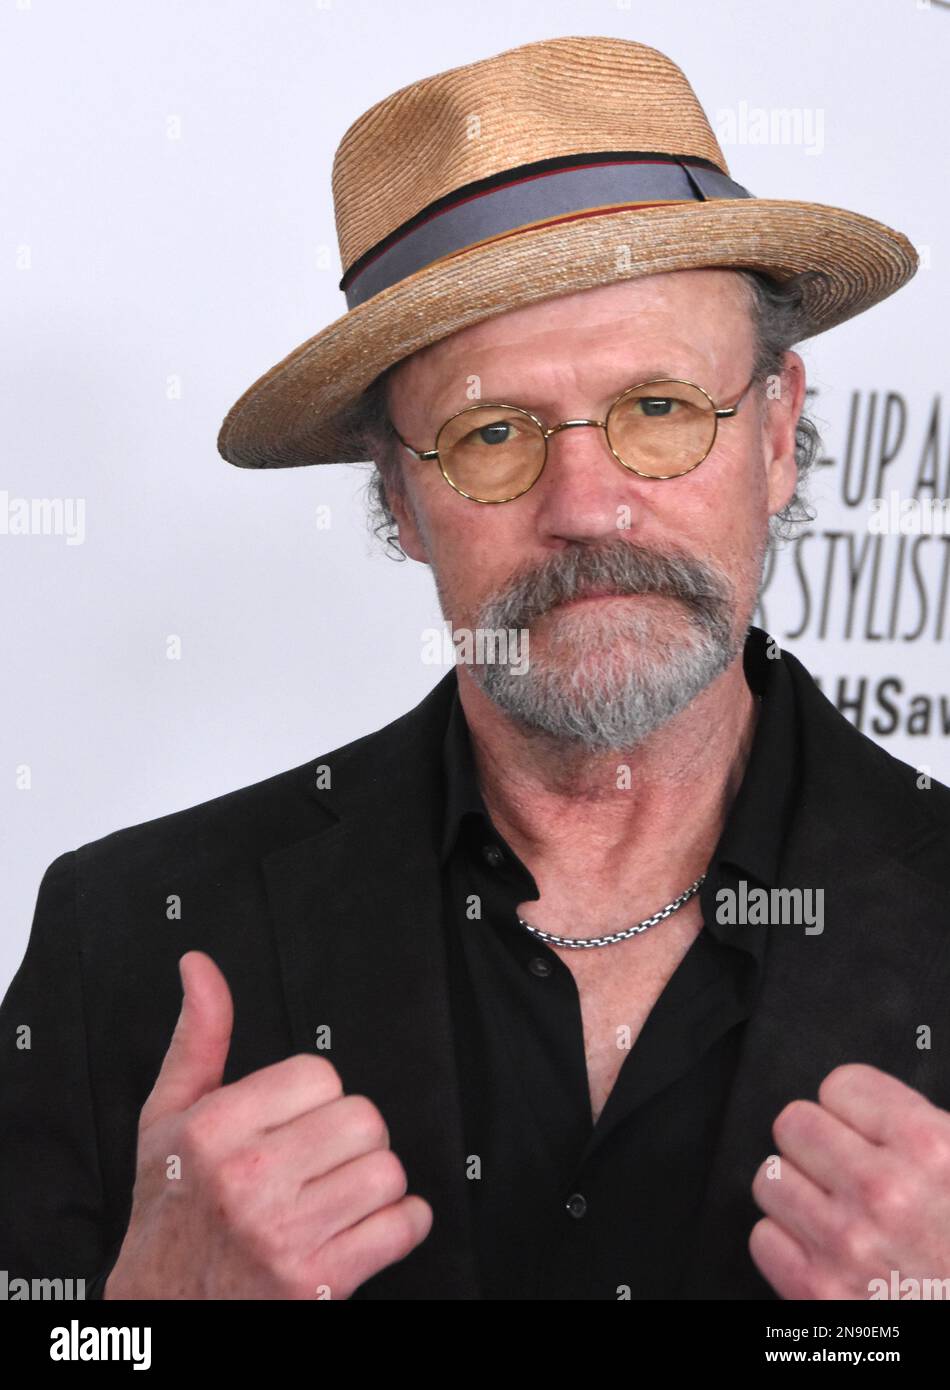 Beverly Hills, California, USA 11th February 2023 Actor Michael Rooker attends the 10th Annual Make-Up Artists & Hair Stylists Guild Awards at The Beverly Hilton Hotel on February 11,2023 in Beverly Hills, California, USA. Photo by Barry King/Alamy Live News Stock Photo